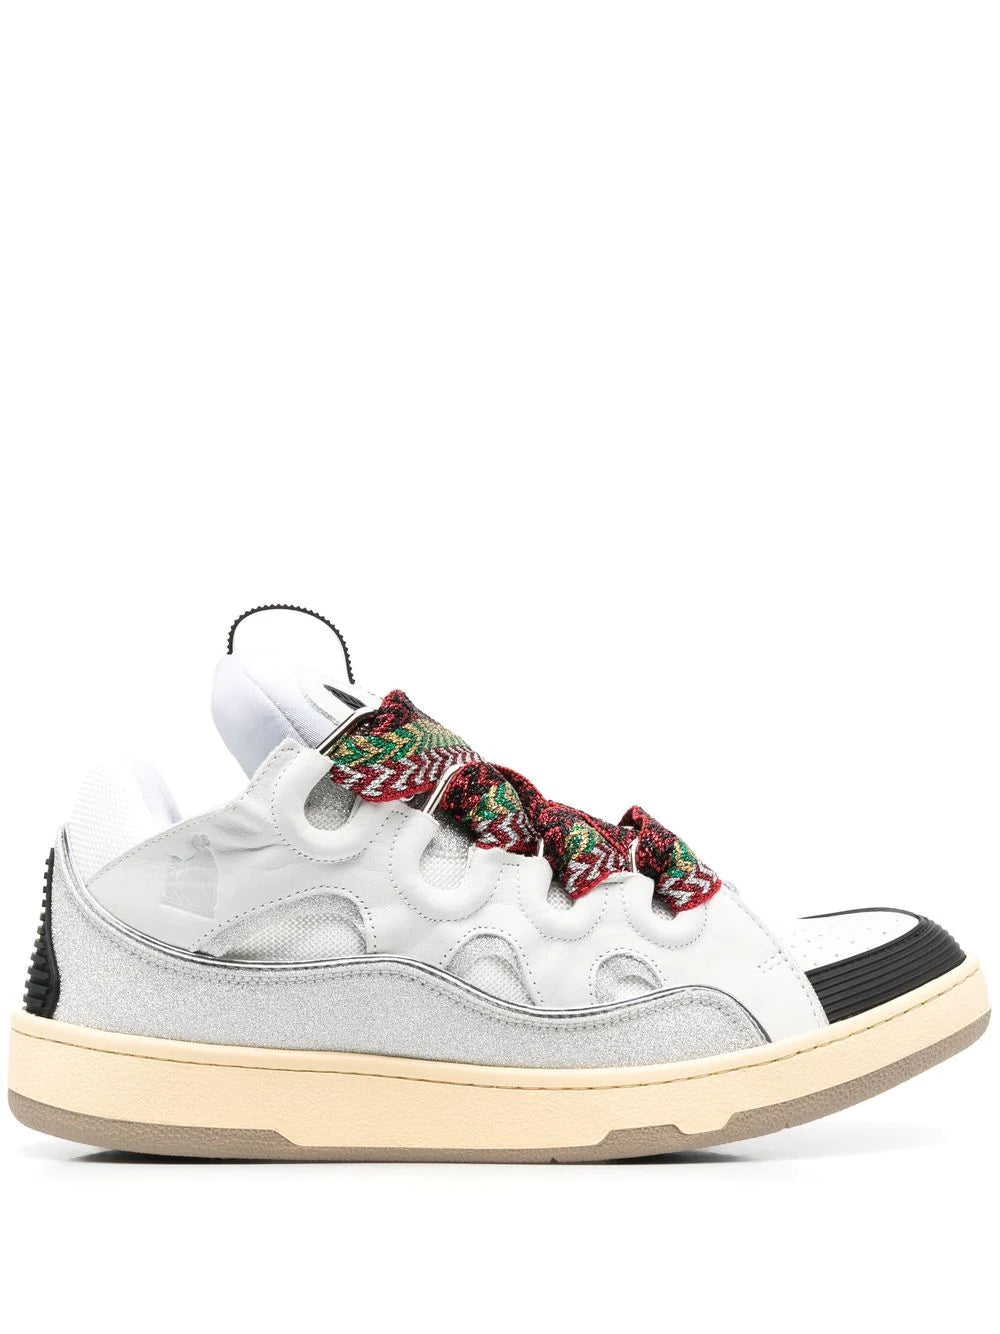 Lanvin chunky lace-up sneakers